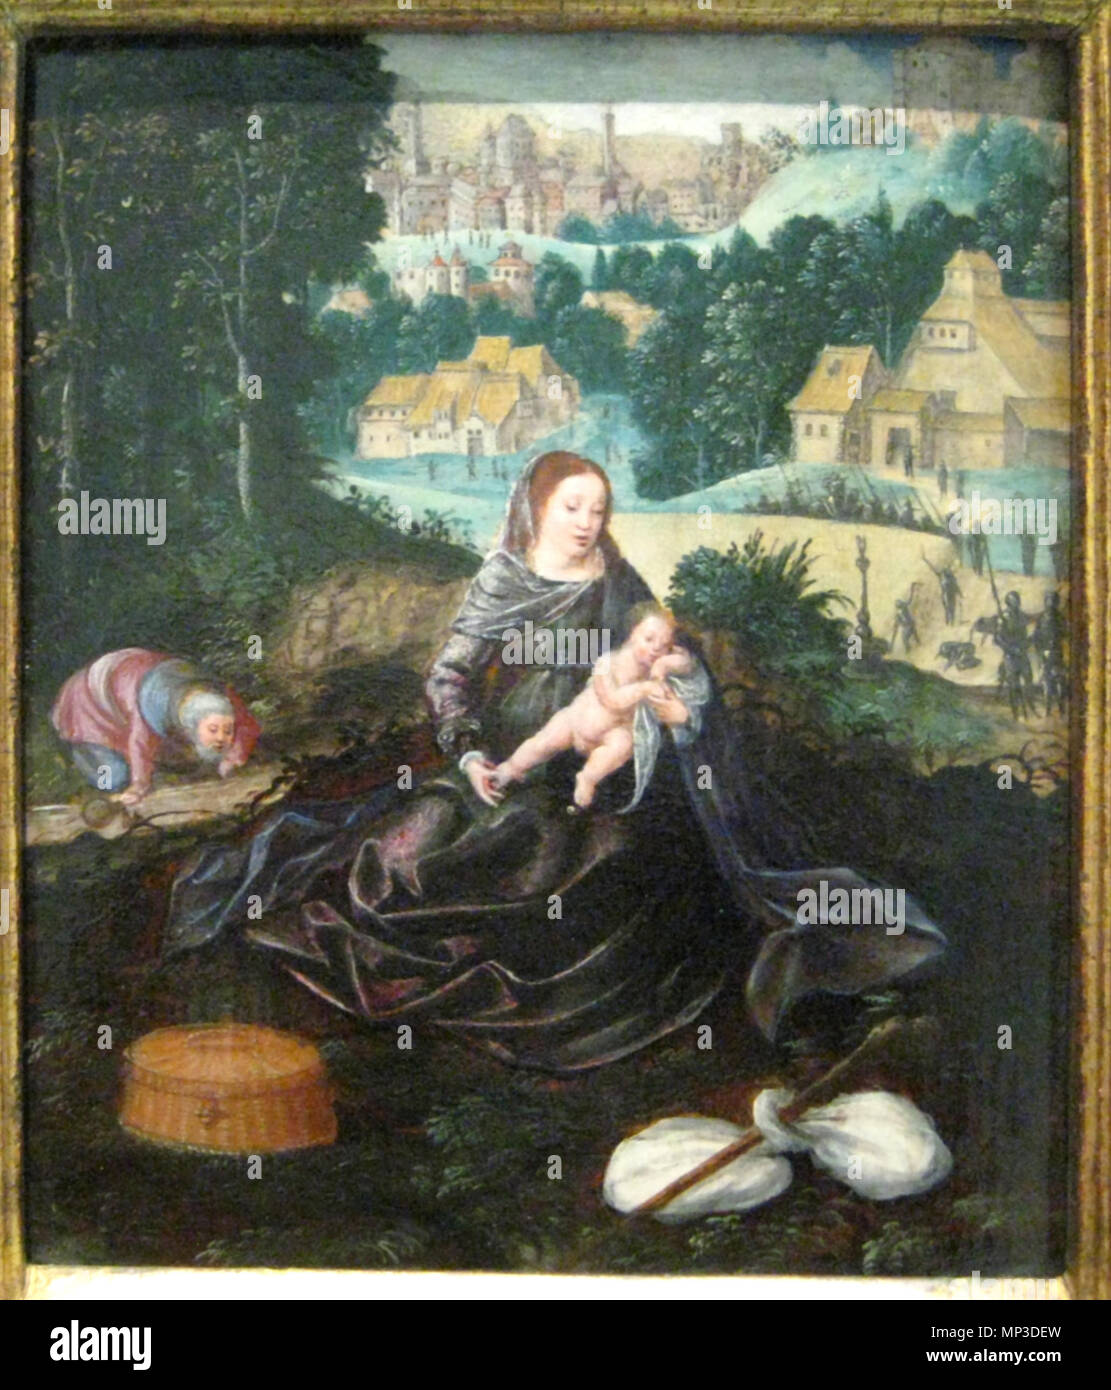 . The Rest on The Flight into Egypt . 16th century.    Circle of Joachim Patinir  (circa 1480–1524)     Alternative names Joachim Patenier, Joachim Patenir, Joachim Patinier  Description Flemish painter and draughtsman  Date of birth/death circa 1480 5 October 1524  Location of birth/death Dinant or Bouvignes-sur-Meuse Antwerp  Work period from 1515 until 1524  Work location Antwerp  Authority control  : Q442491 VIAF: 74123527 ISNI: 0000 0001 0823 3608 ULAN: 500019854 LCCN: n81068576 WGA: PATENIER, Joachim WorldCat 1054 Rest on the Flight into Egypt (circle of Joachim Patinir) Stock Photo